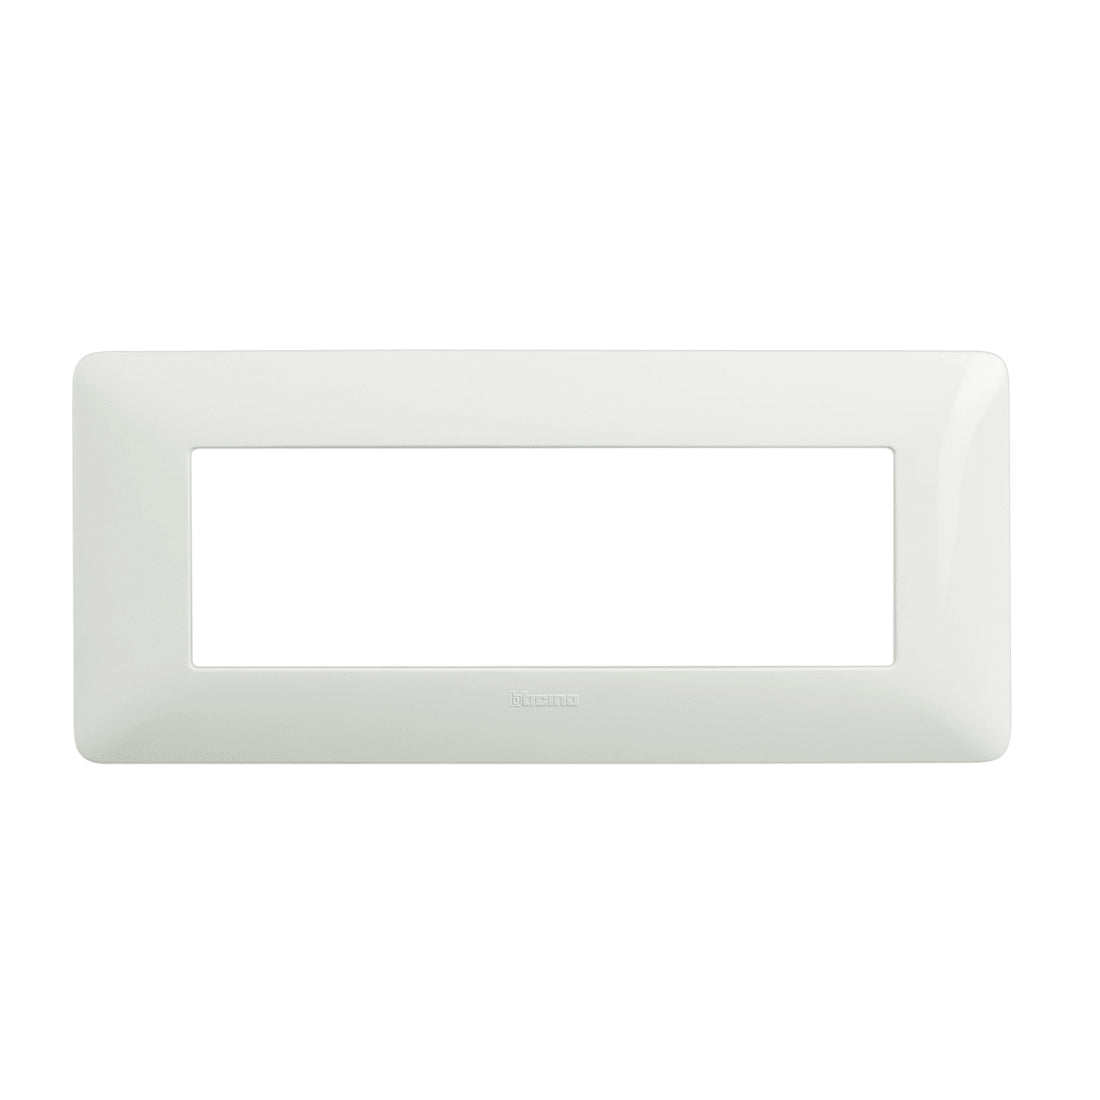 MATIX PLATE 6 PLACES WHITE